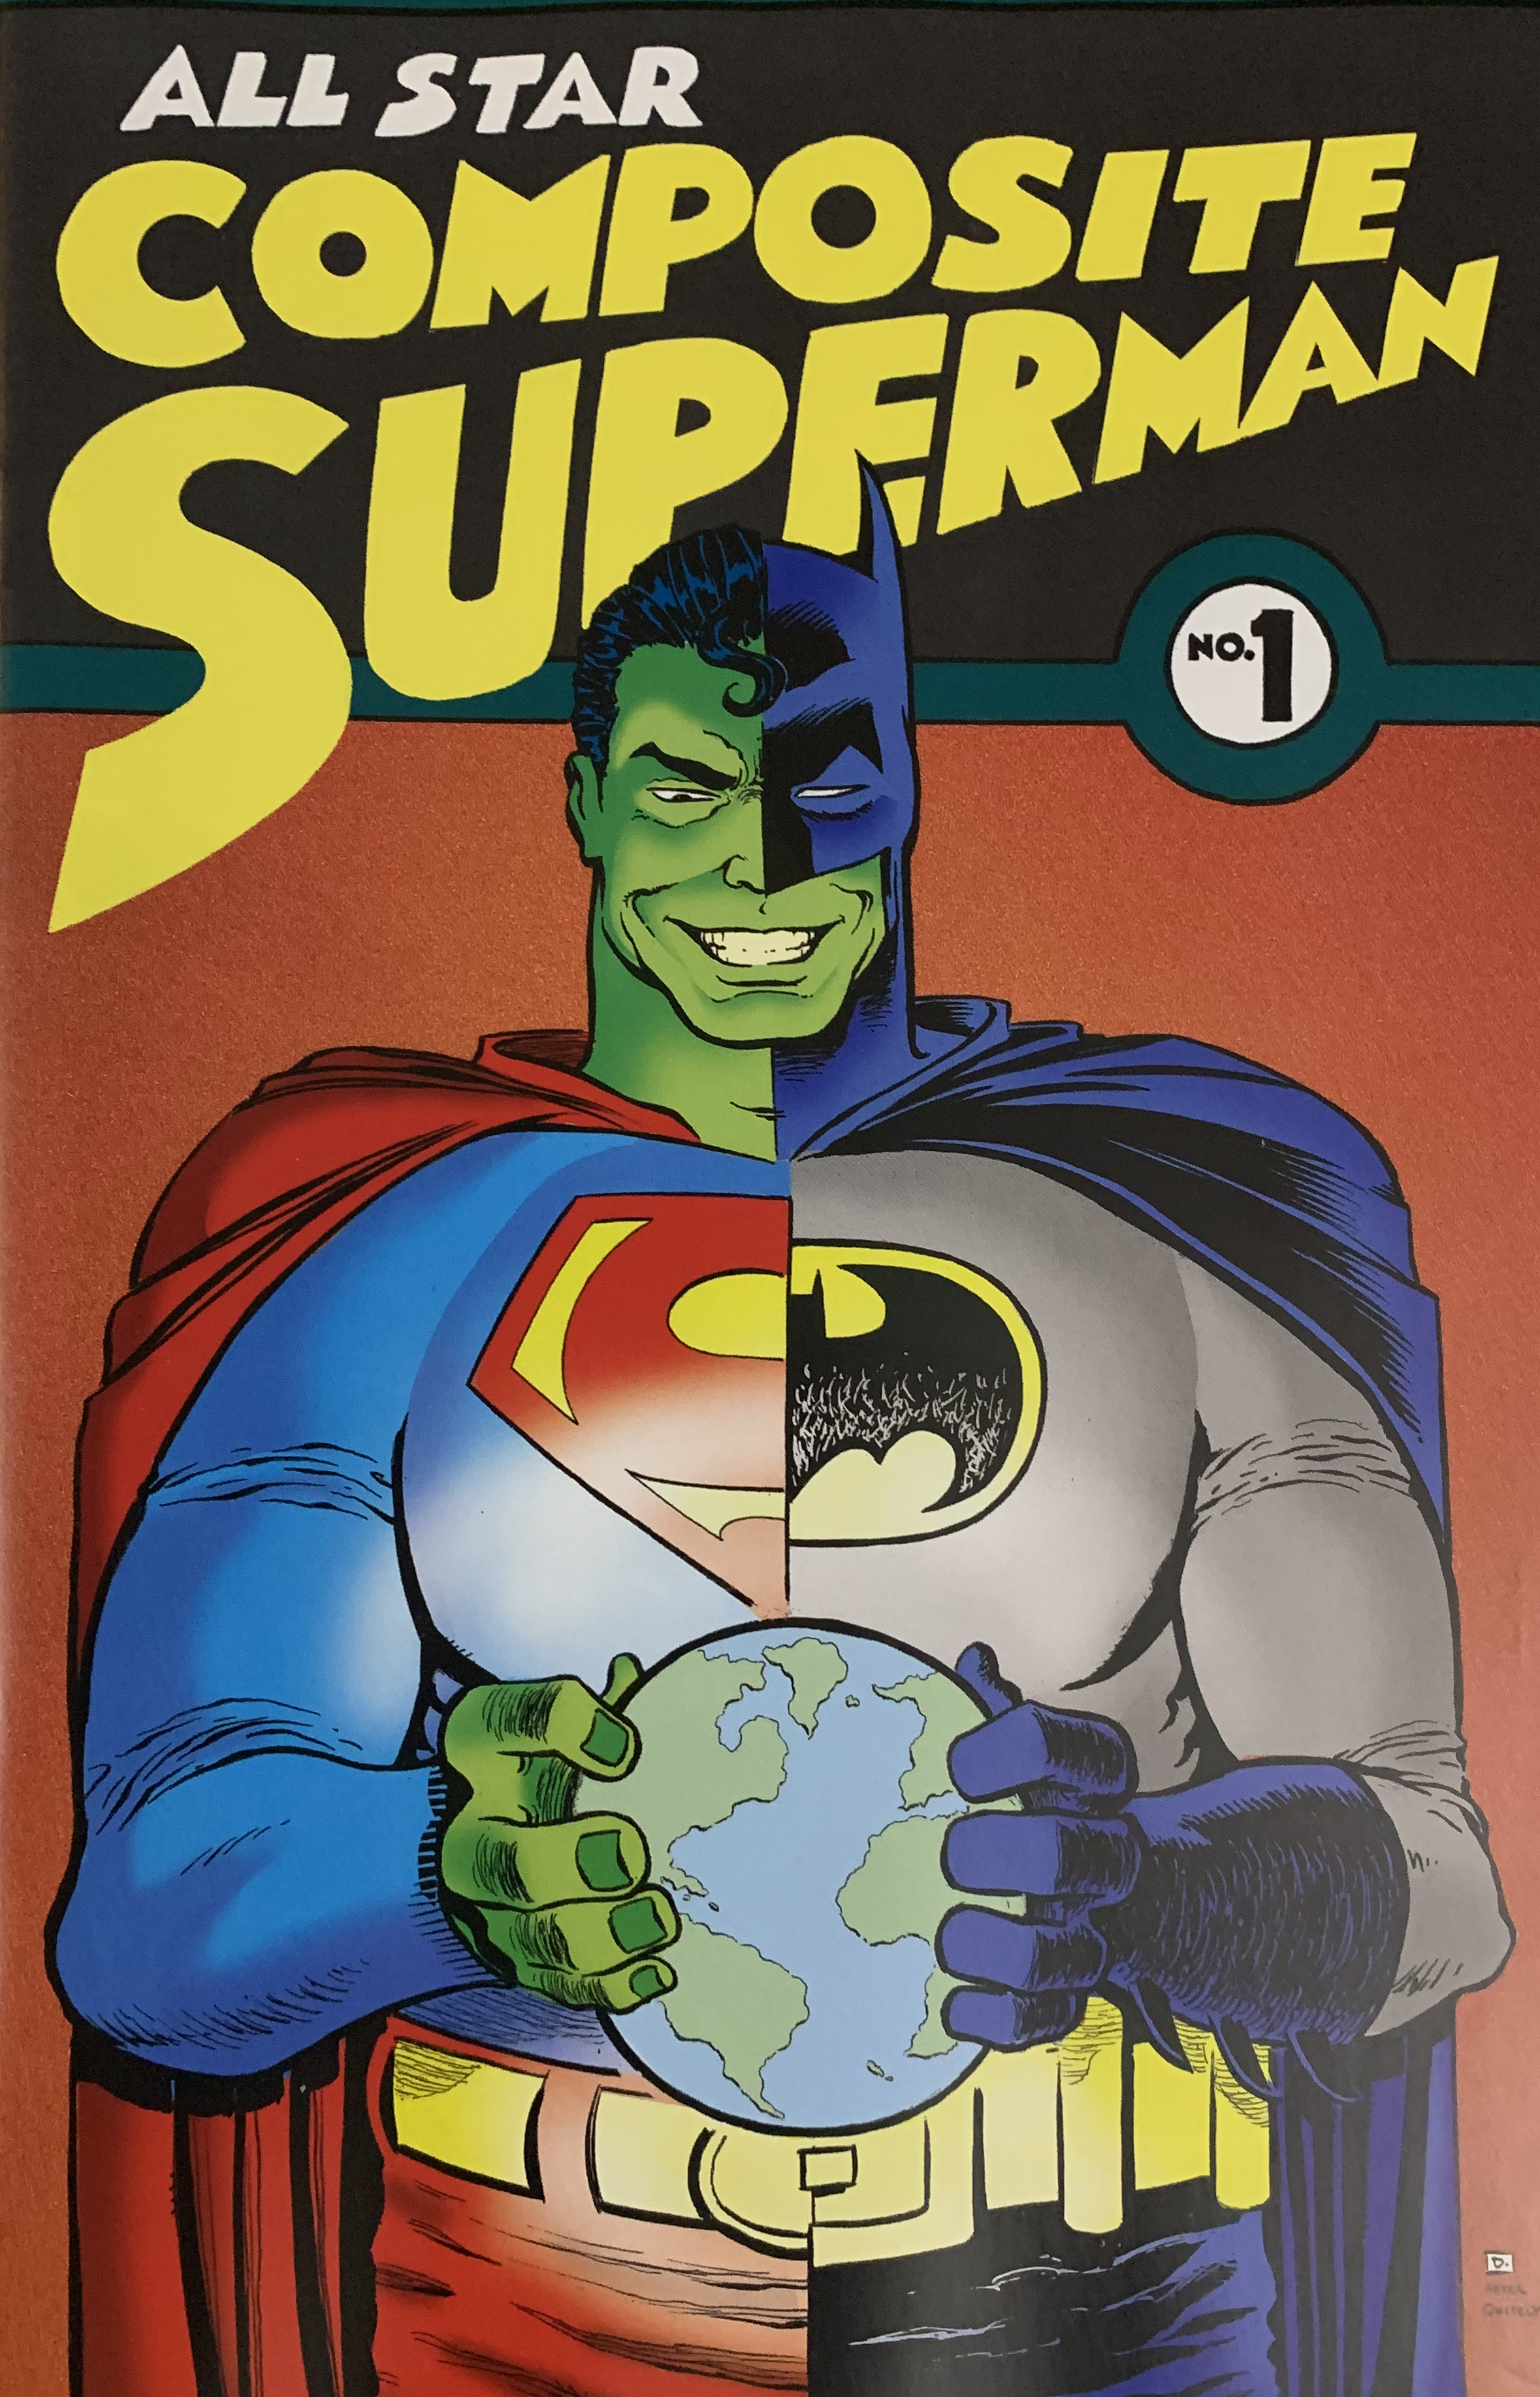 Cover art for All Star Composite Superman #1 by Dave Howlett